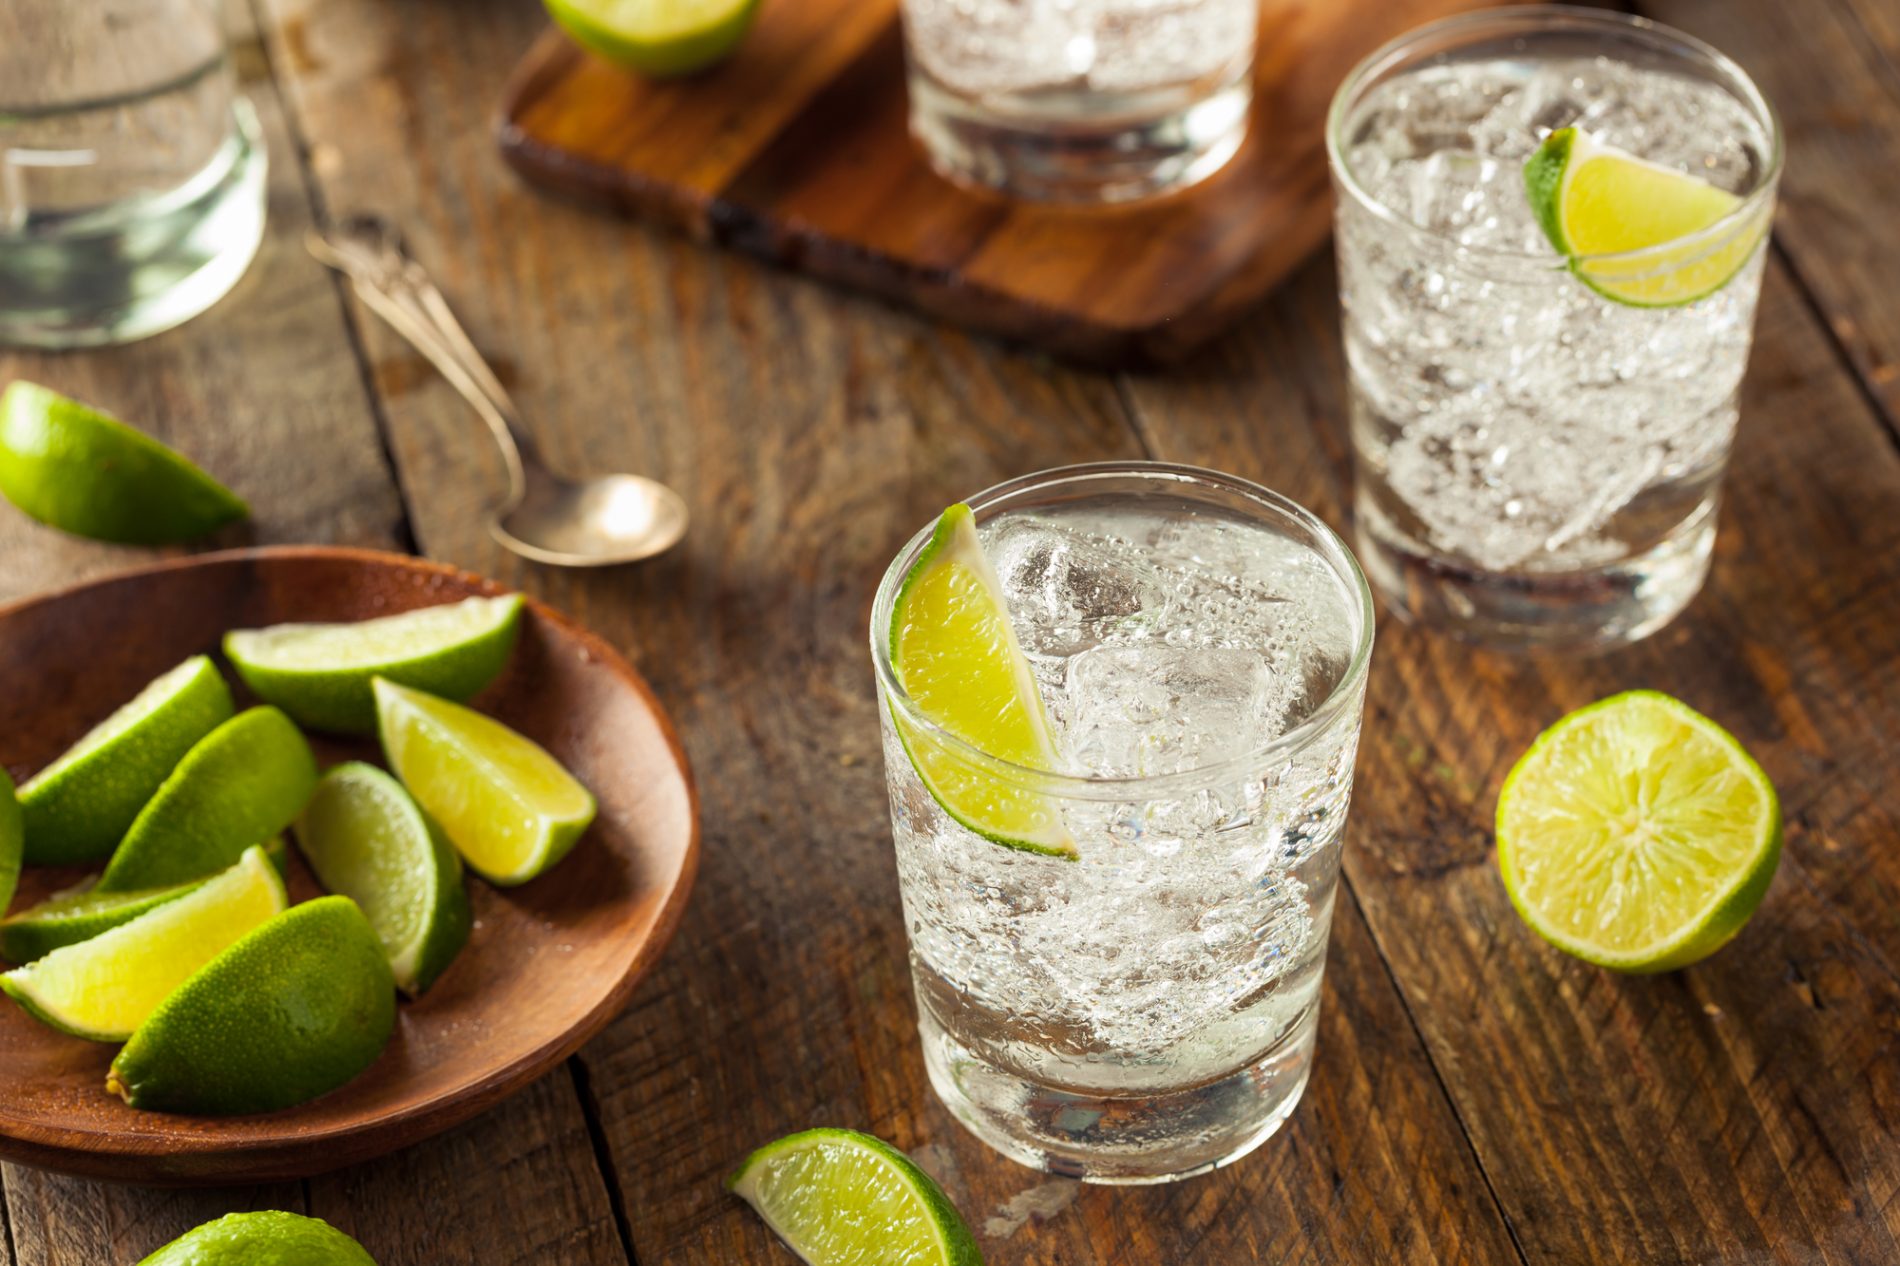 Best Gins for Your Bachelor Party